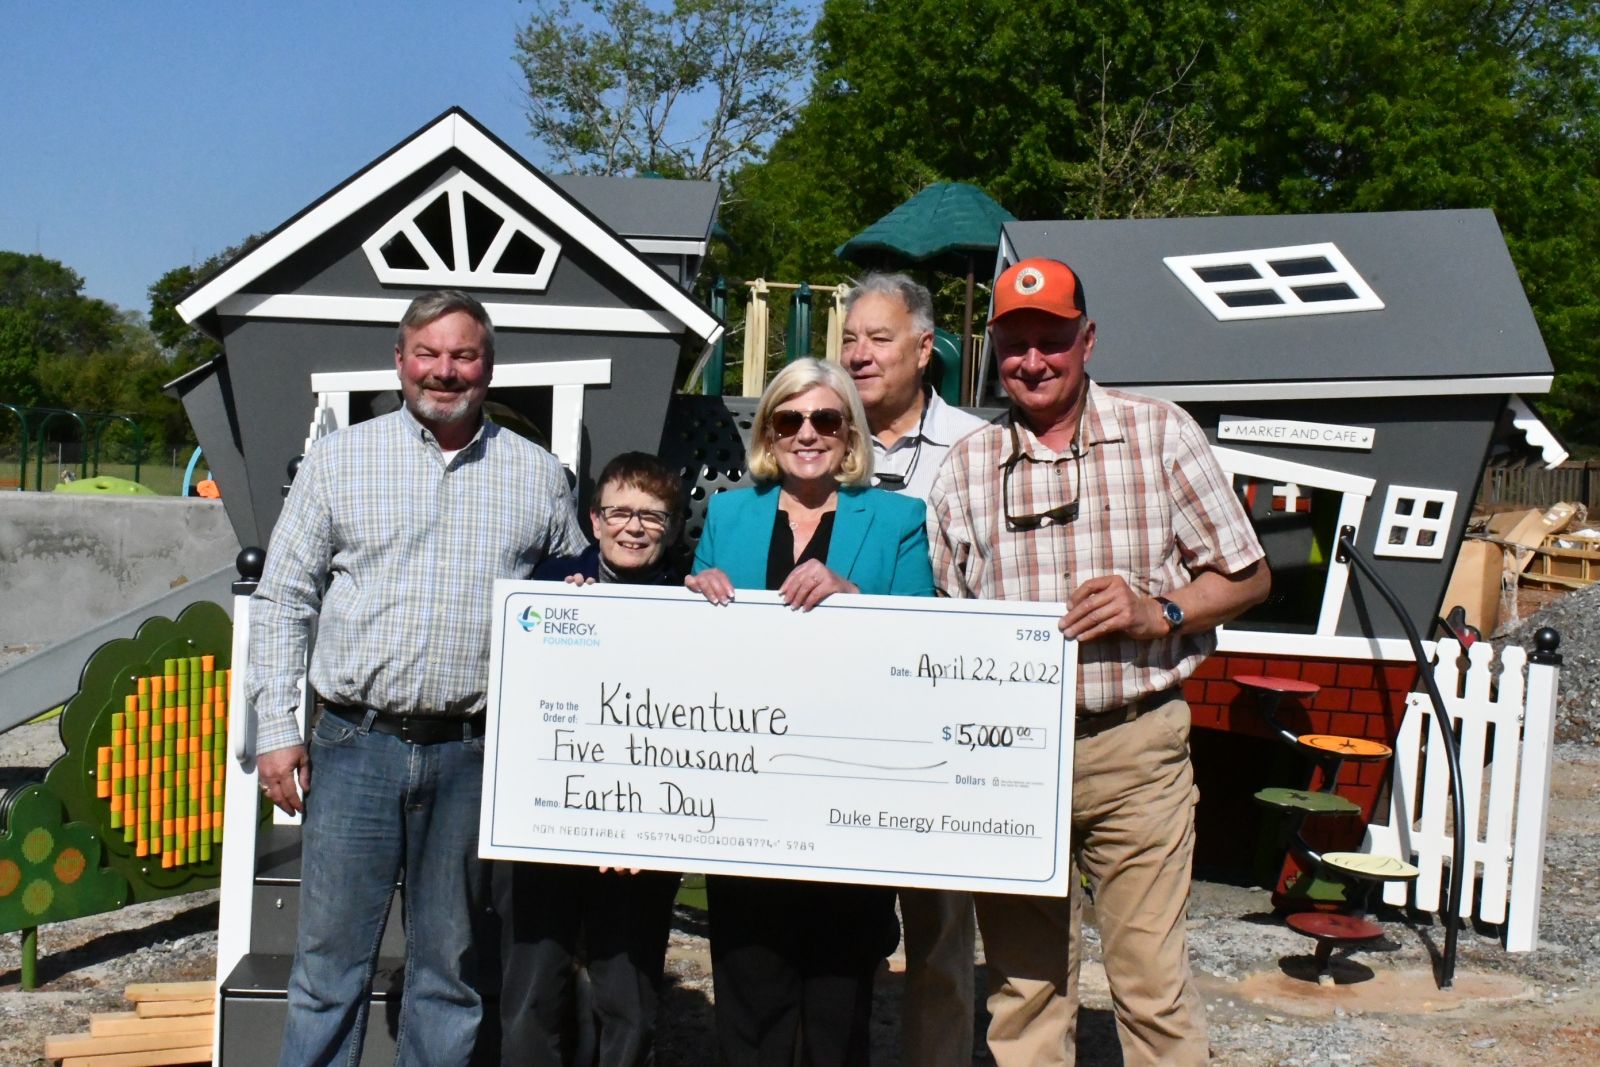 Anderson County's Kidventure Park also received a $5,000 "surcee" grant from Duke Energy. (Photo/Provided)